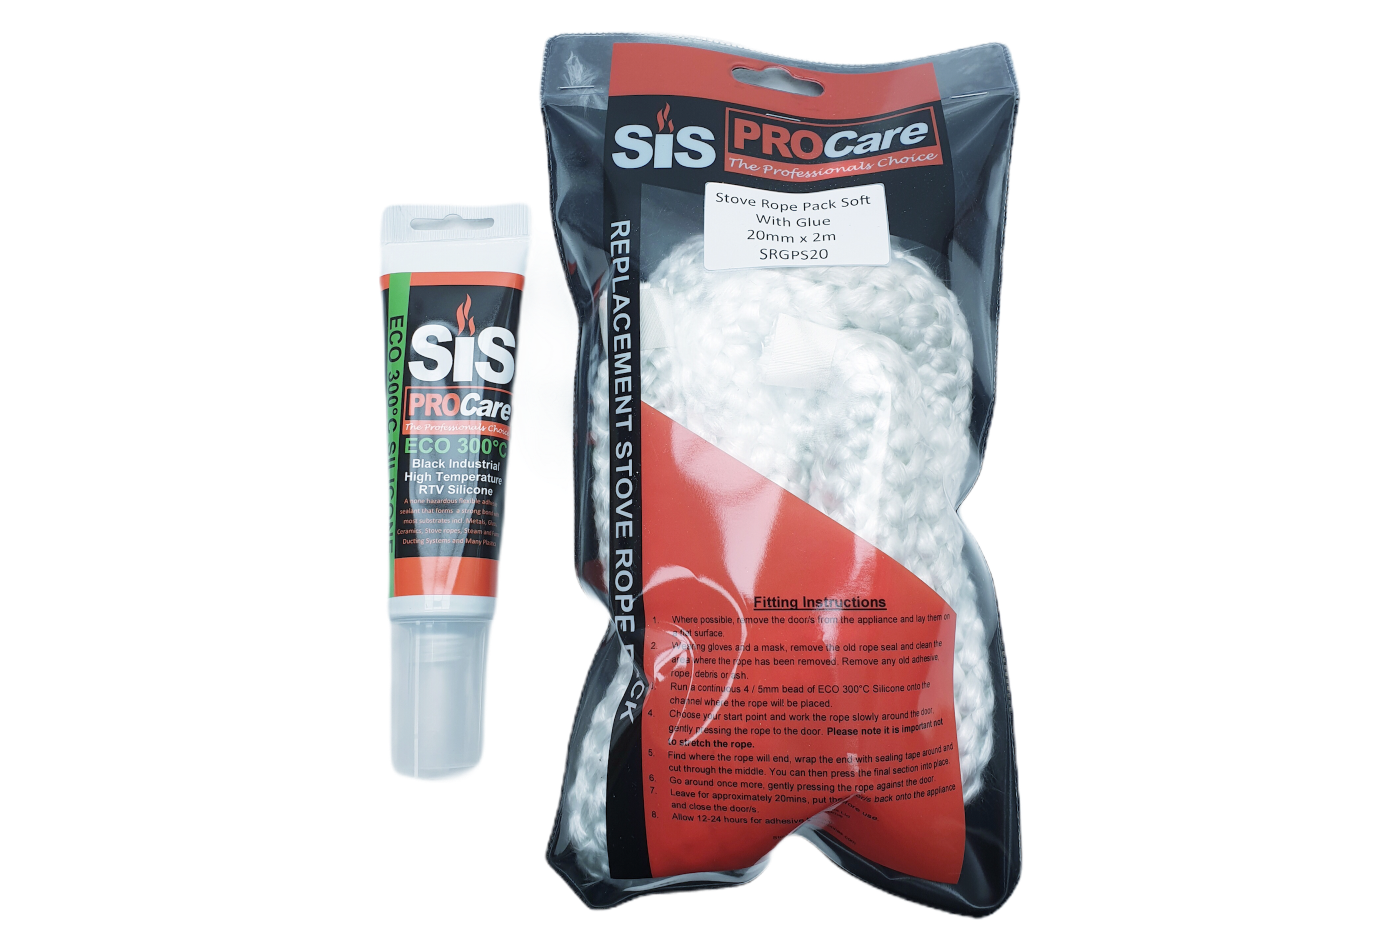 SiS Procare White 20 milimetre x 2 metre Soft Stove Rope & 80 millilitre Rope Glue Pack - product code SRGPS20